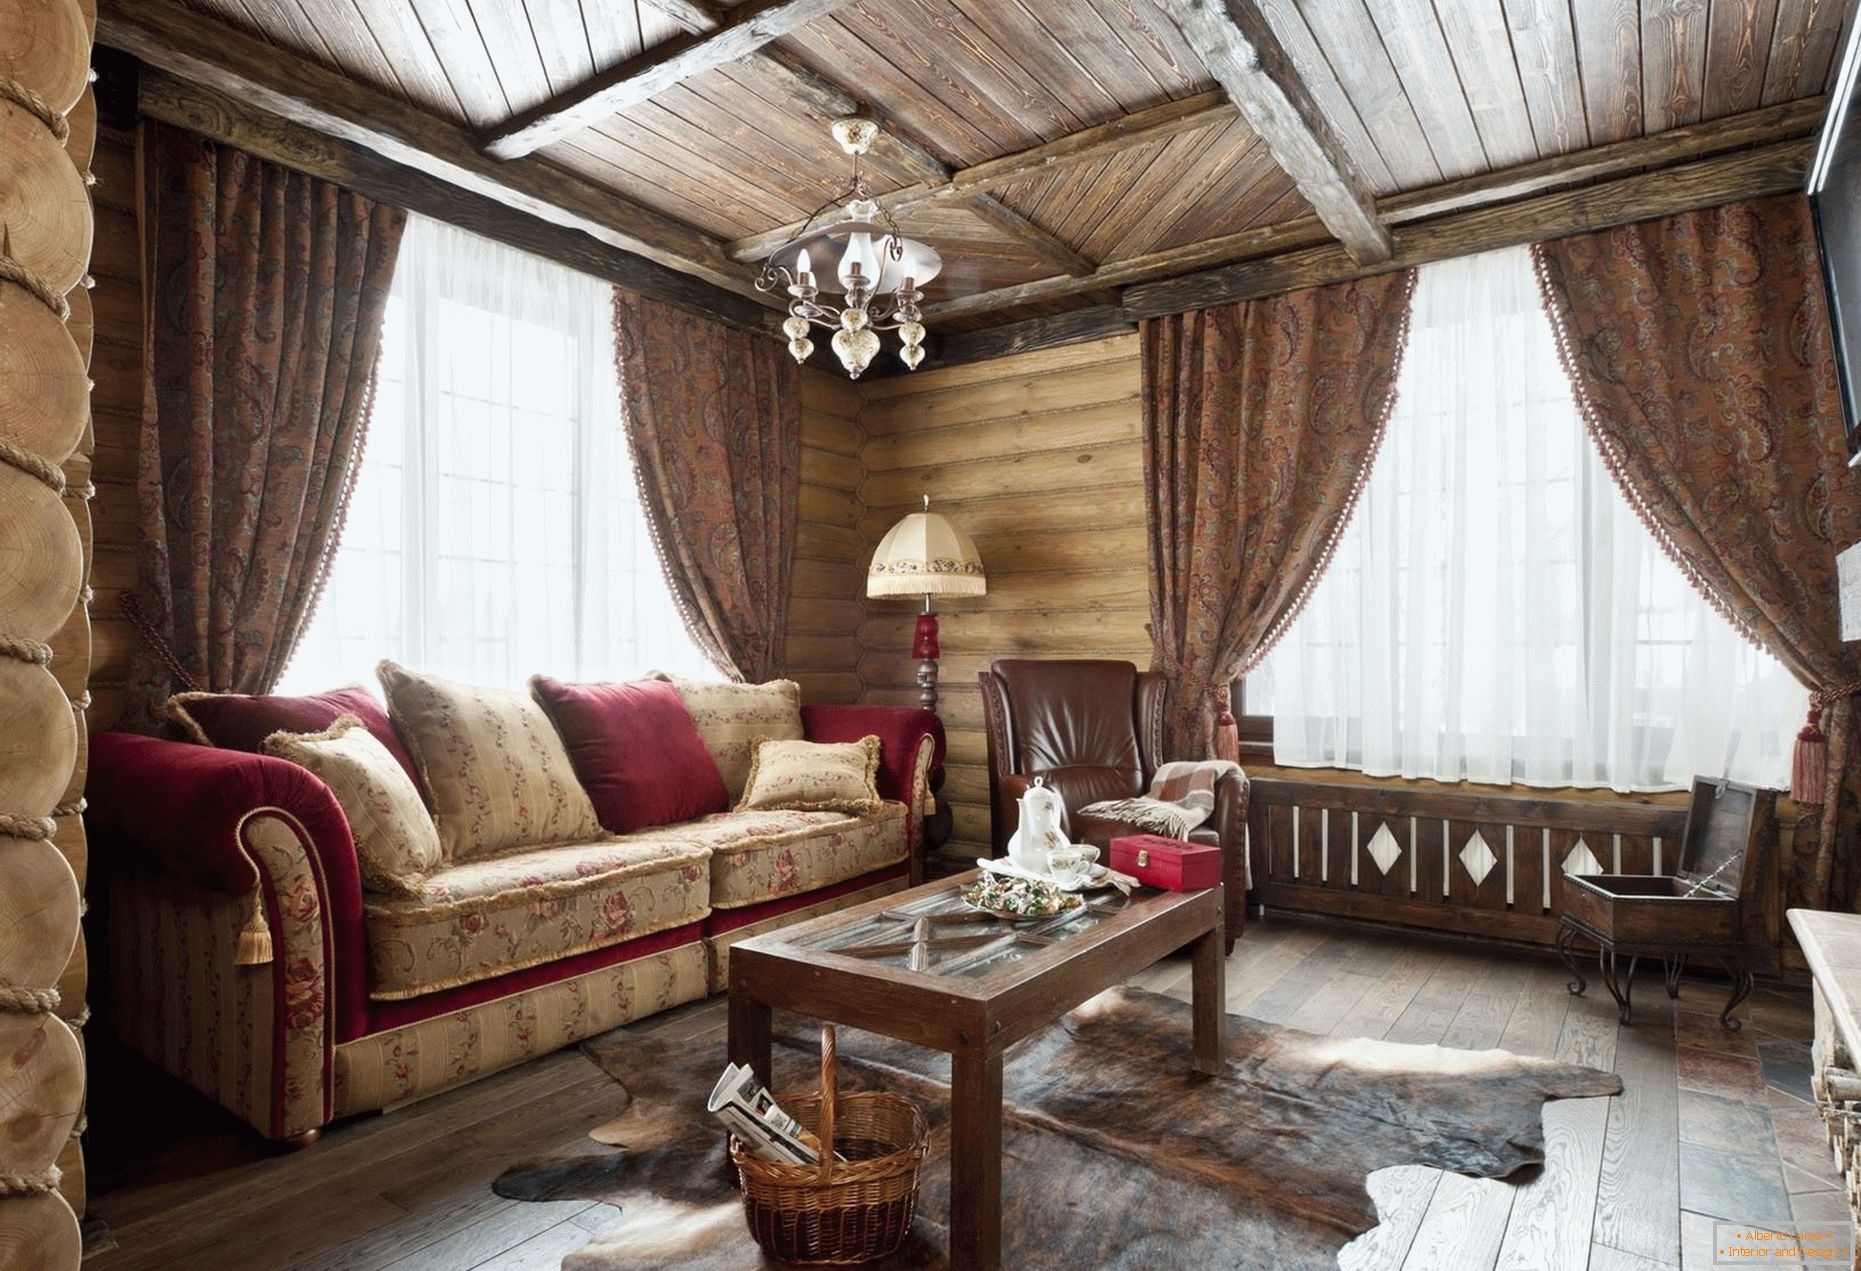 Wooden ceiling in the living room